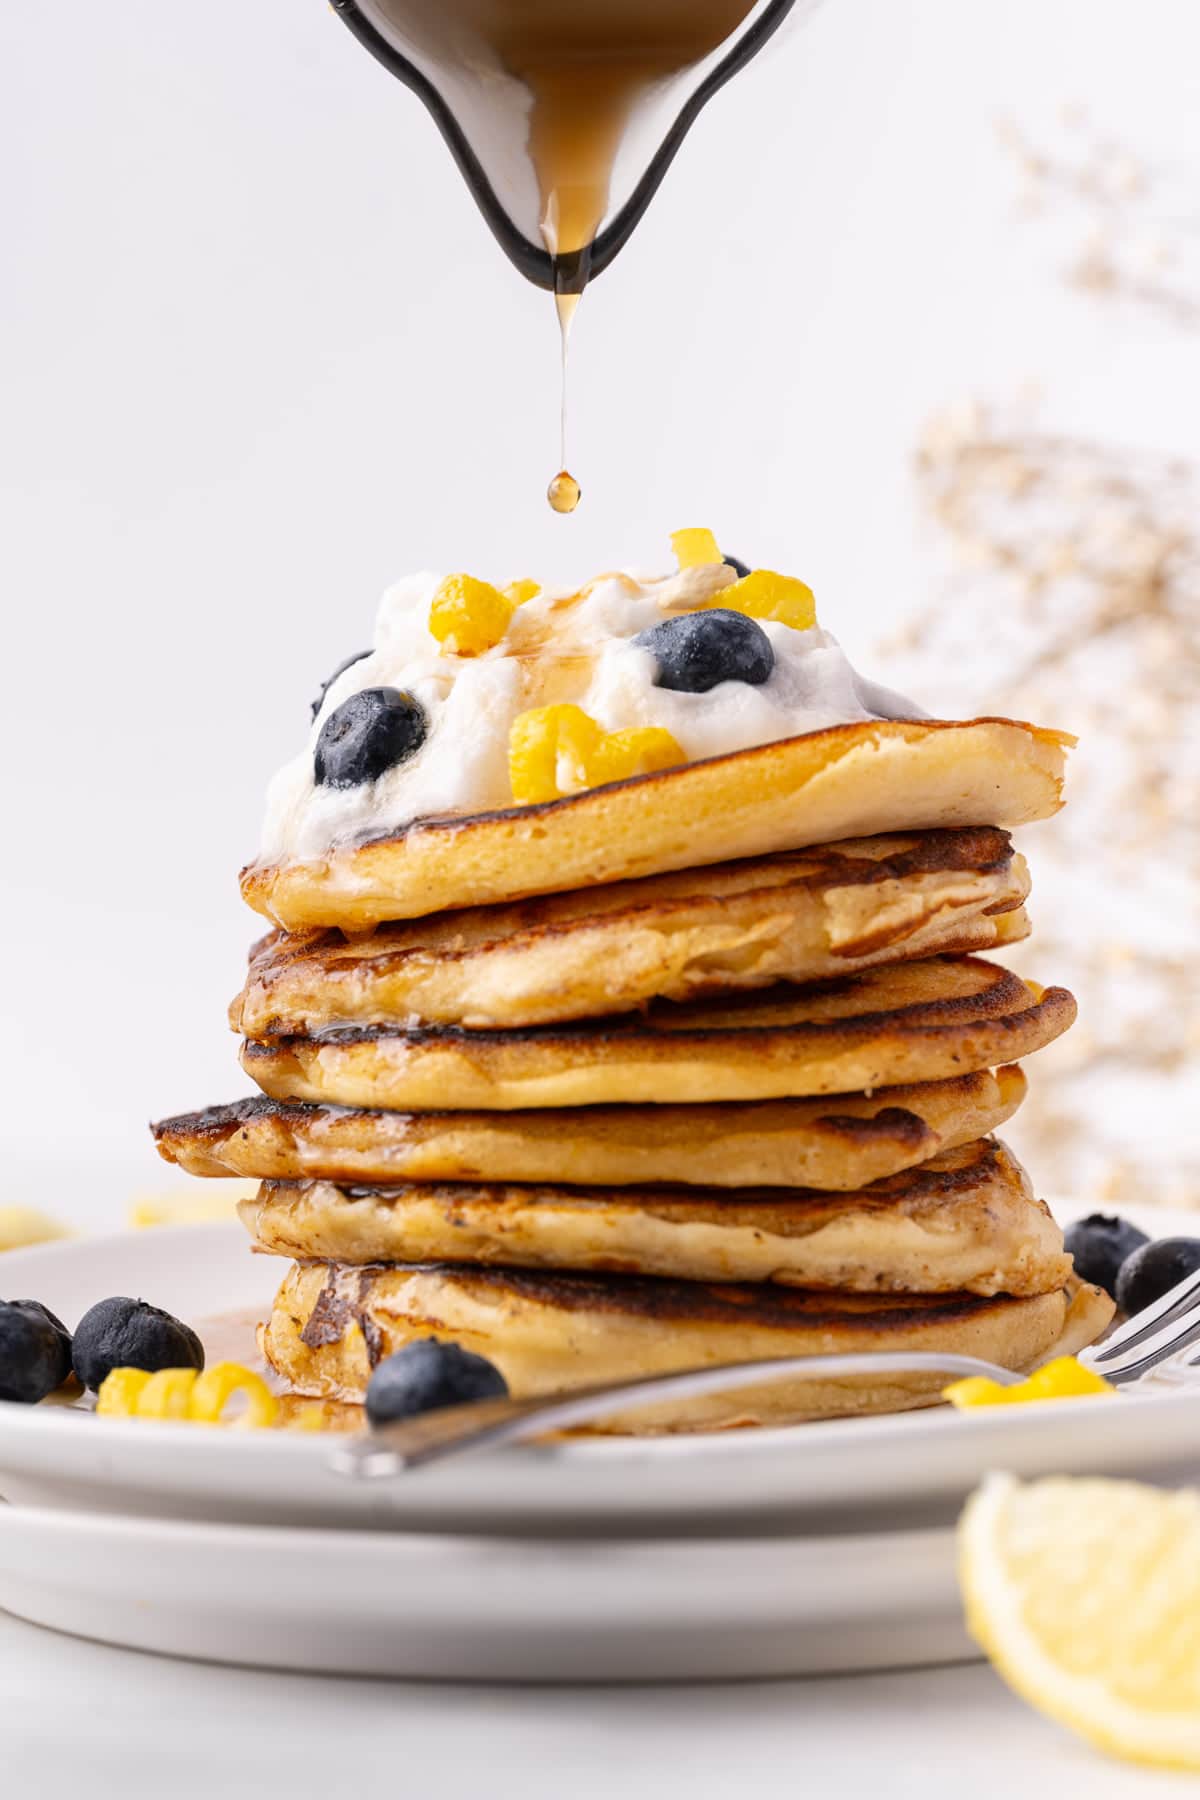 Maple syrup dripping onto stack of lemon pancakes